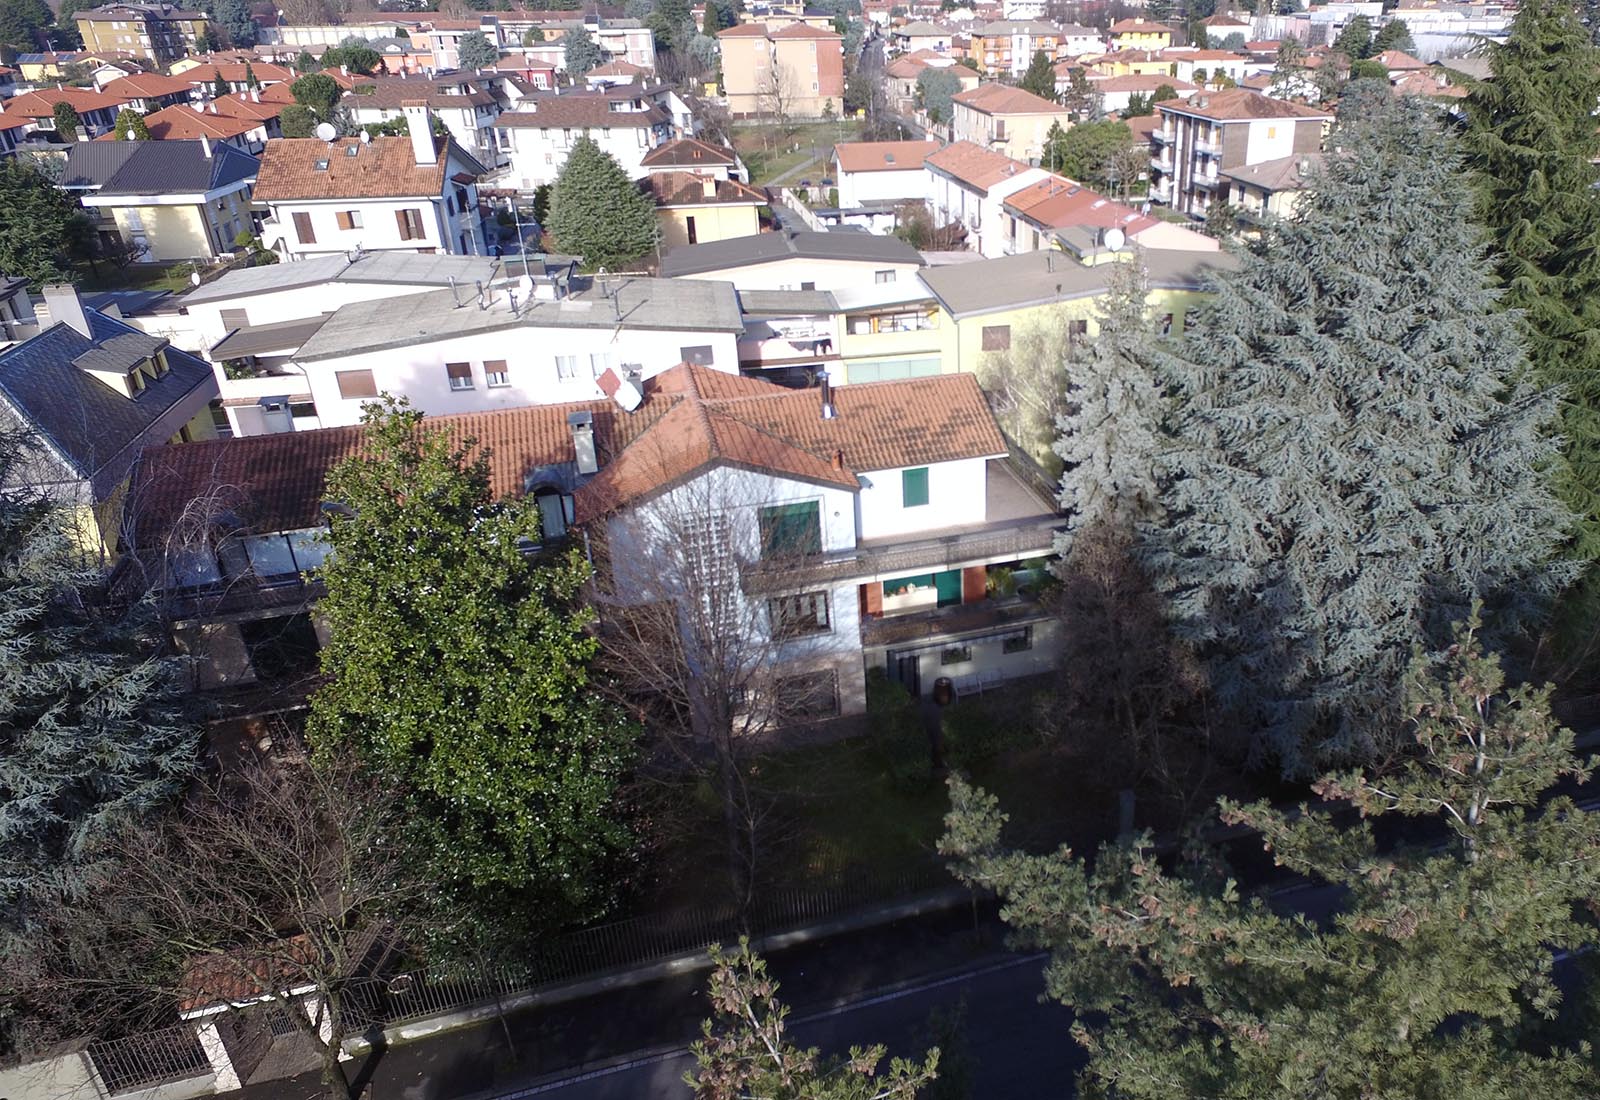 House extension in Giovanni XXIII street in Nerviano - Aerial view